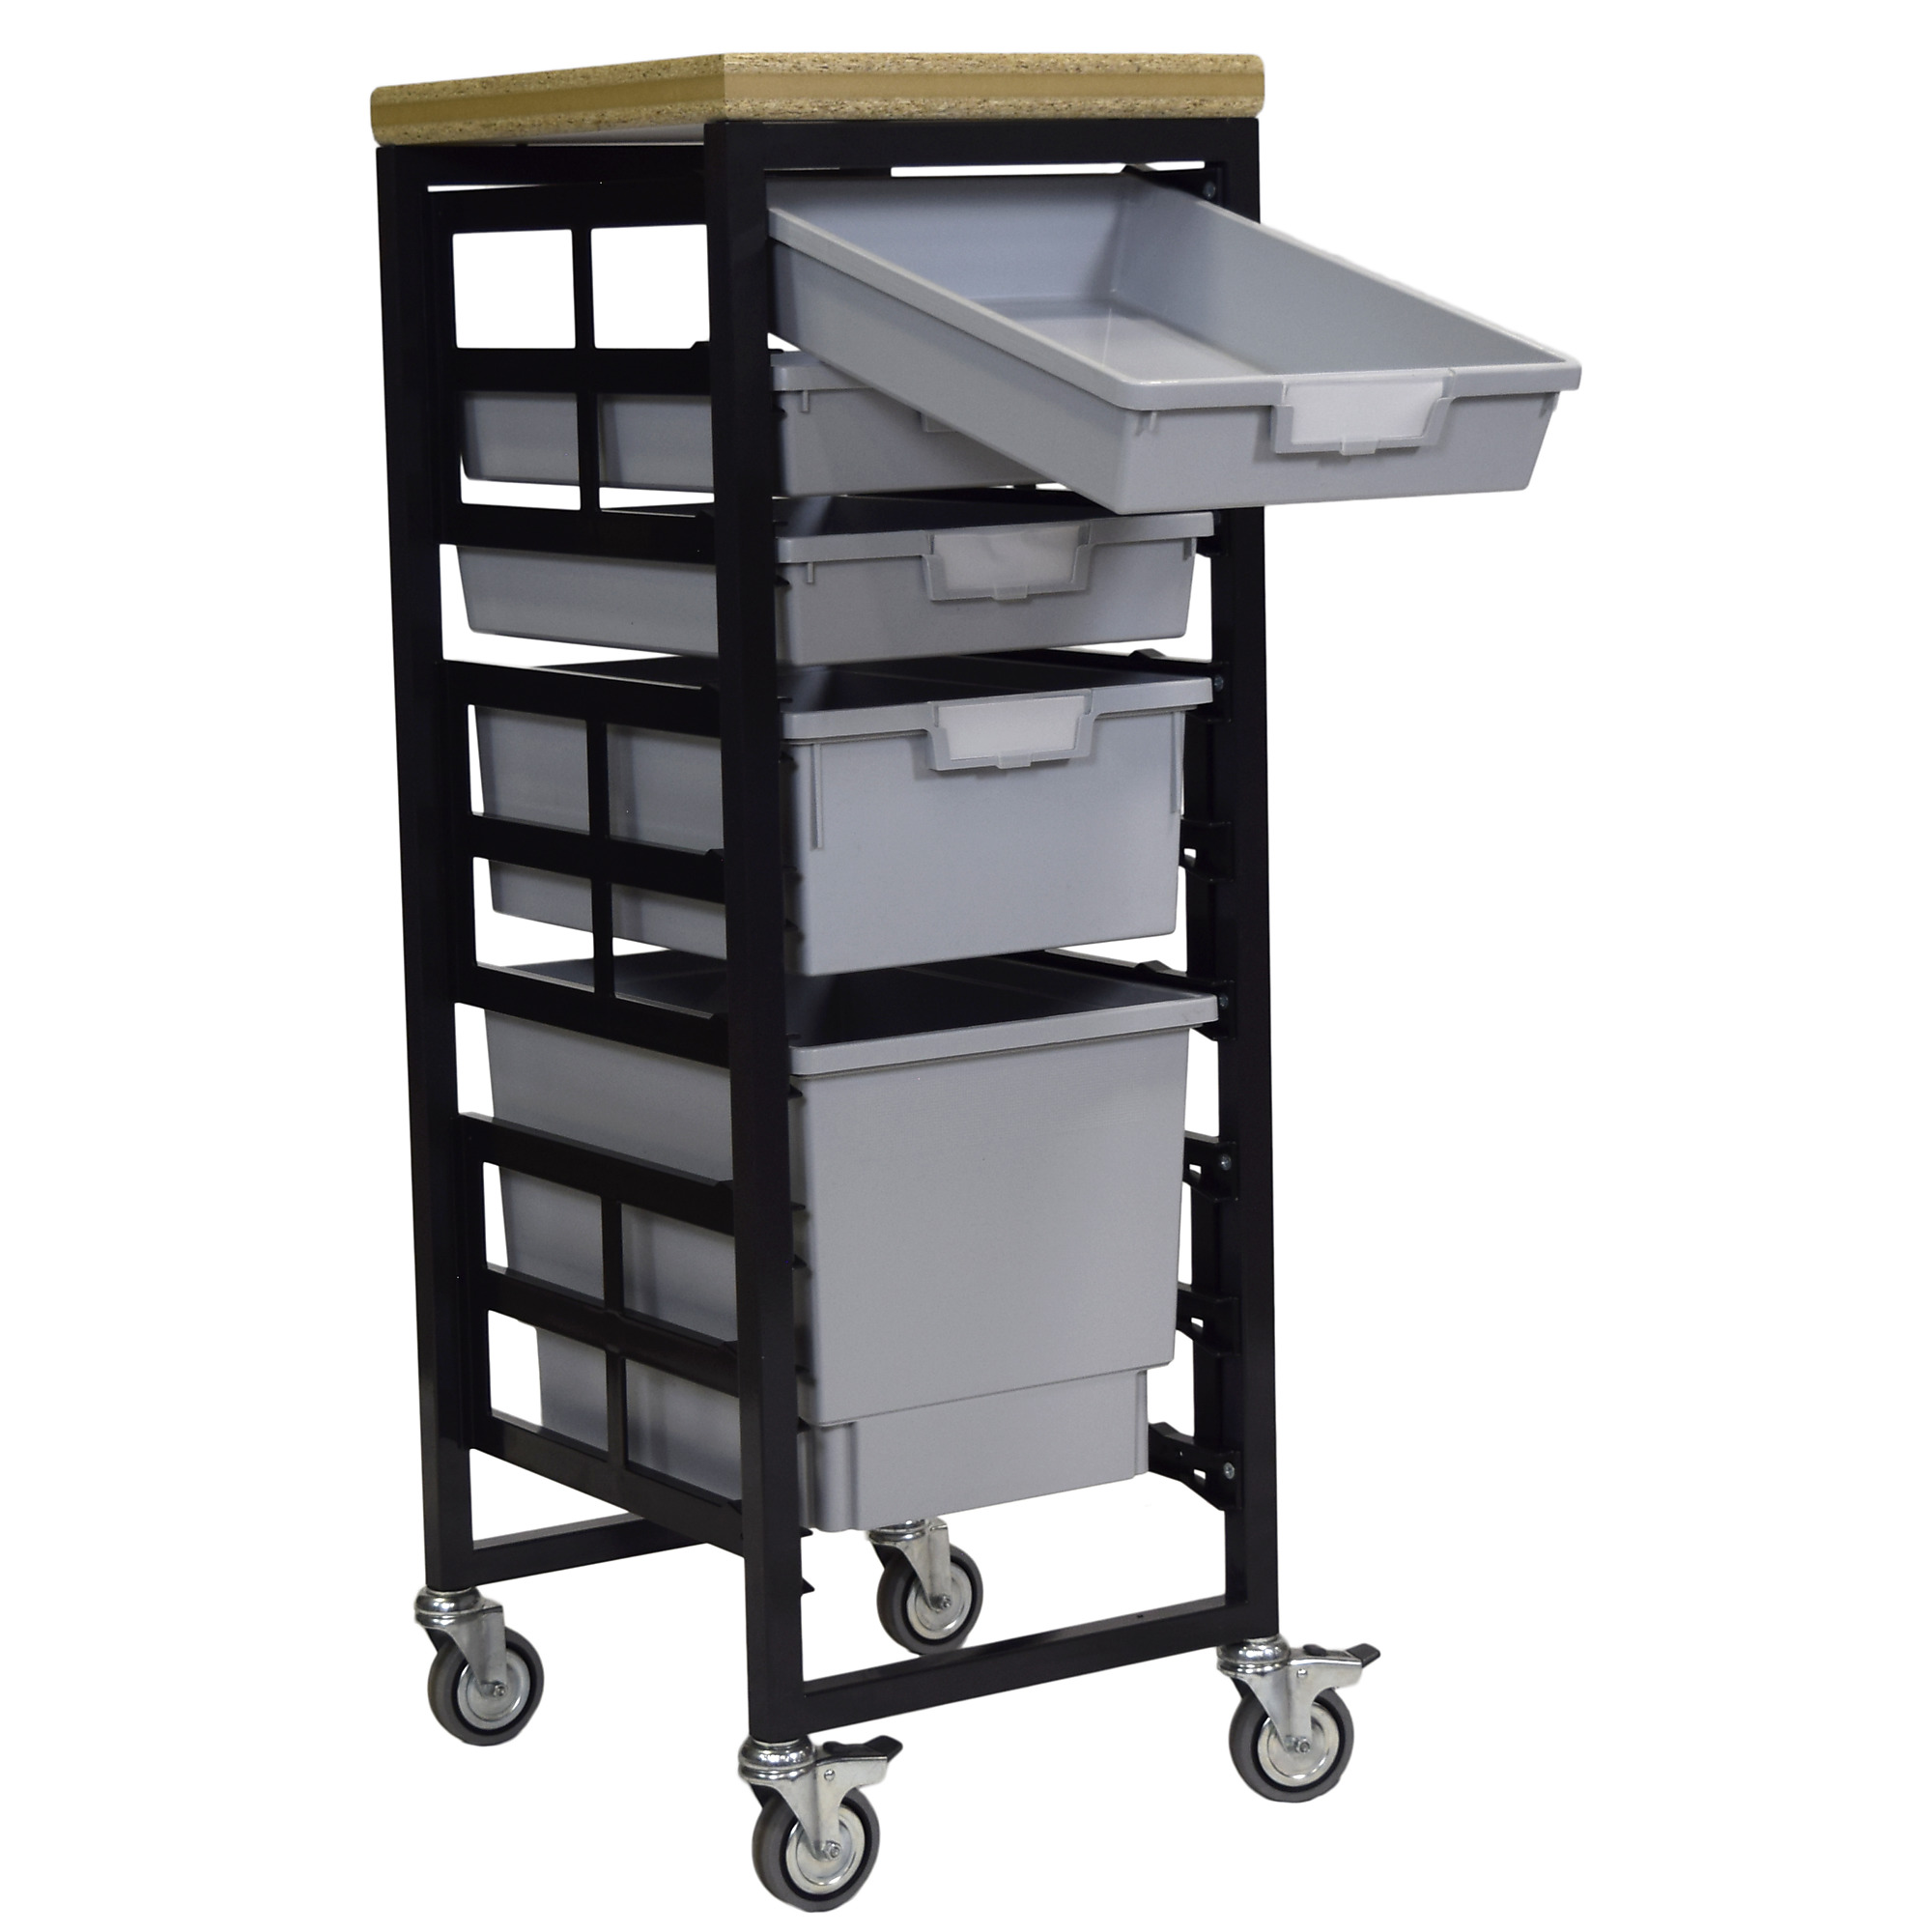 Certwood StorWerks, Mobile Work Station w/Wood Top -5 Trays-Gray, Included (qty.) 5, Material Plastic, Height 3 in, Model CE2097DGGC-3S1D1QLG